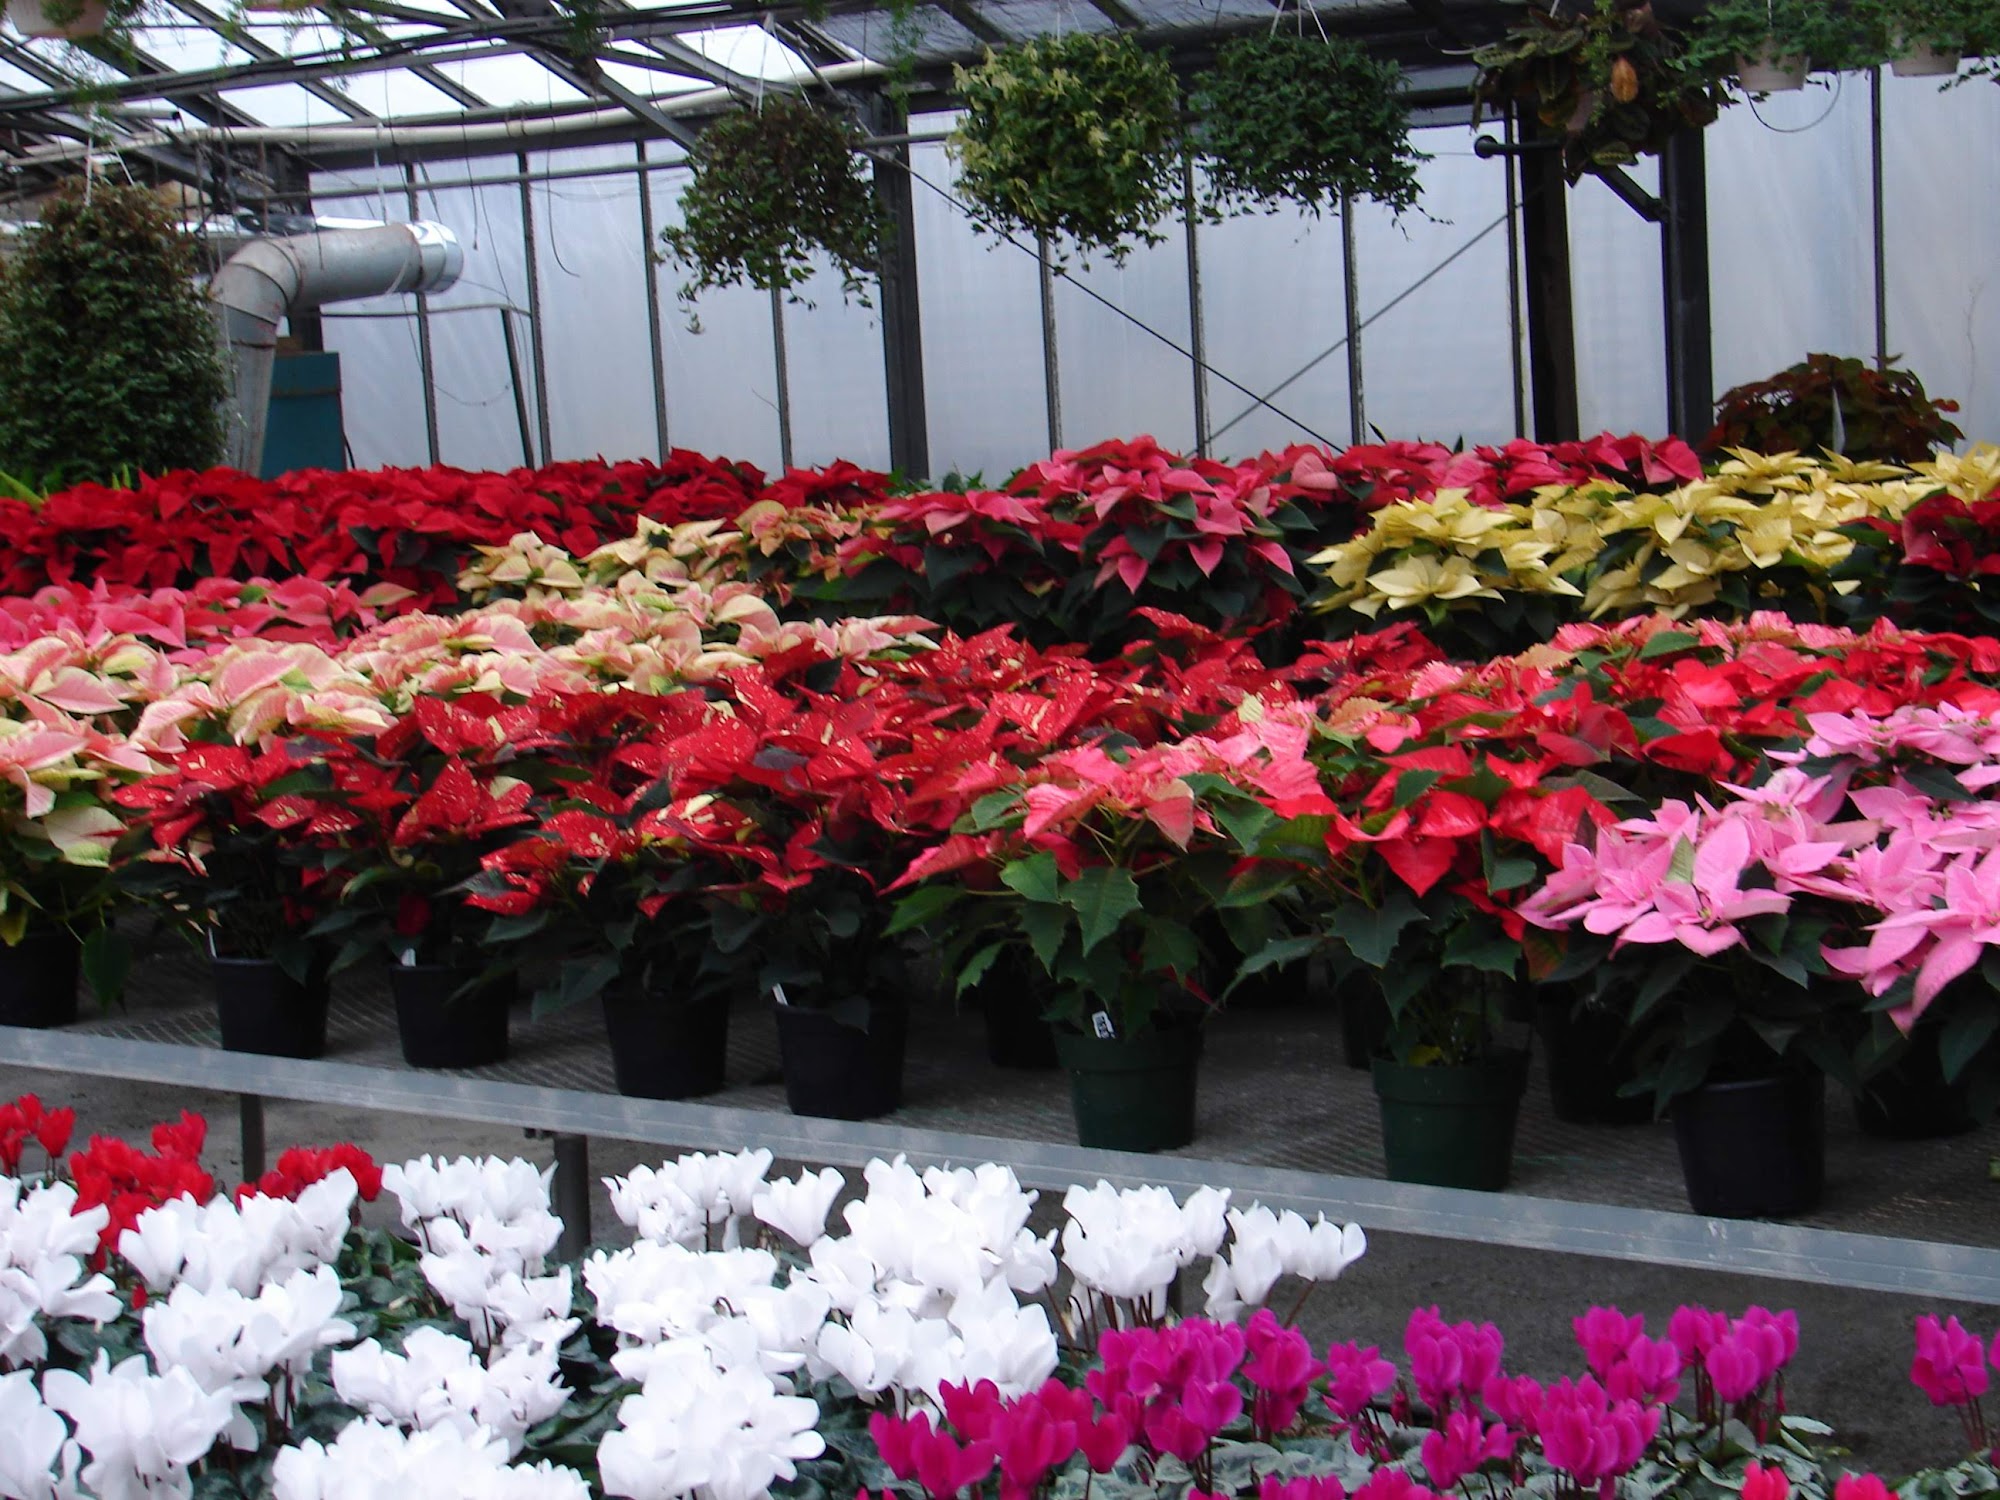 White House Nursery - retail outlet Open Seasonally, please check website for hours, 17422 Falls Rd, Upperco Maryland 21155